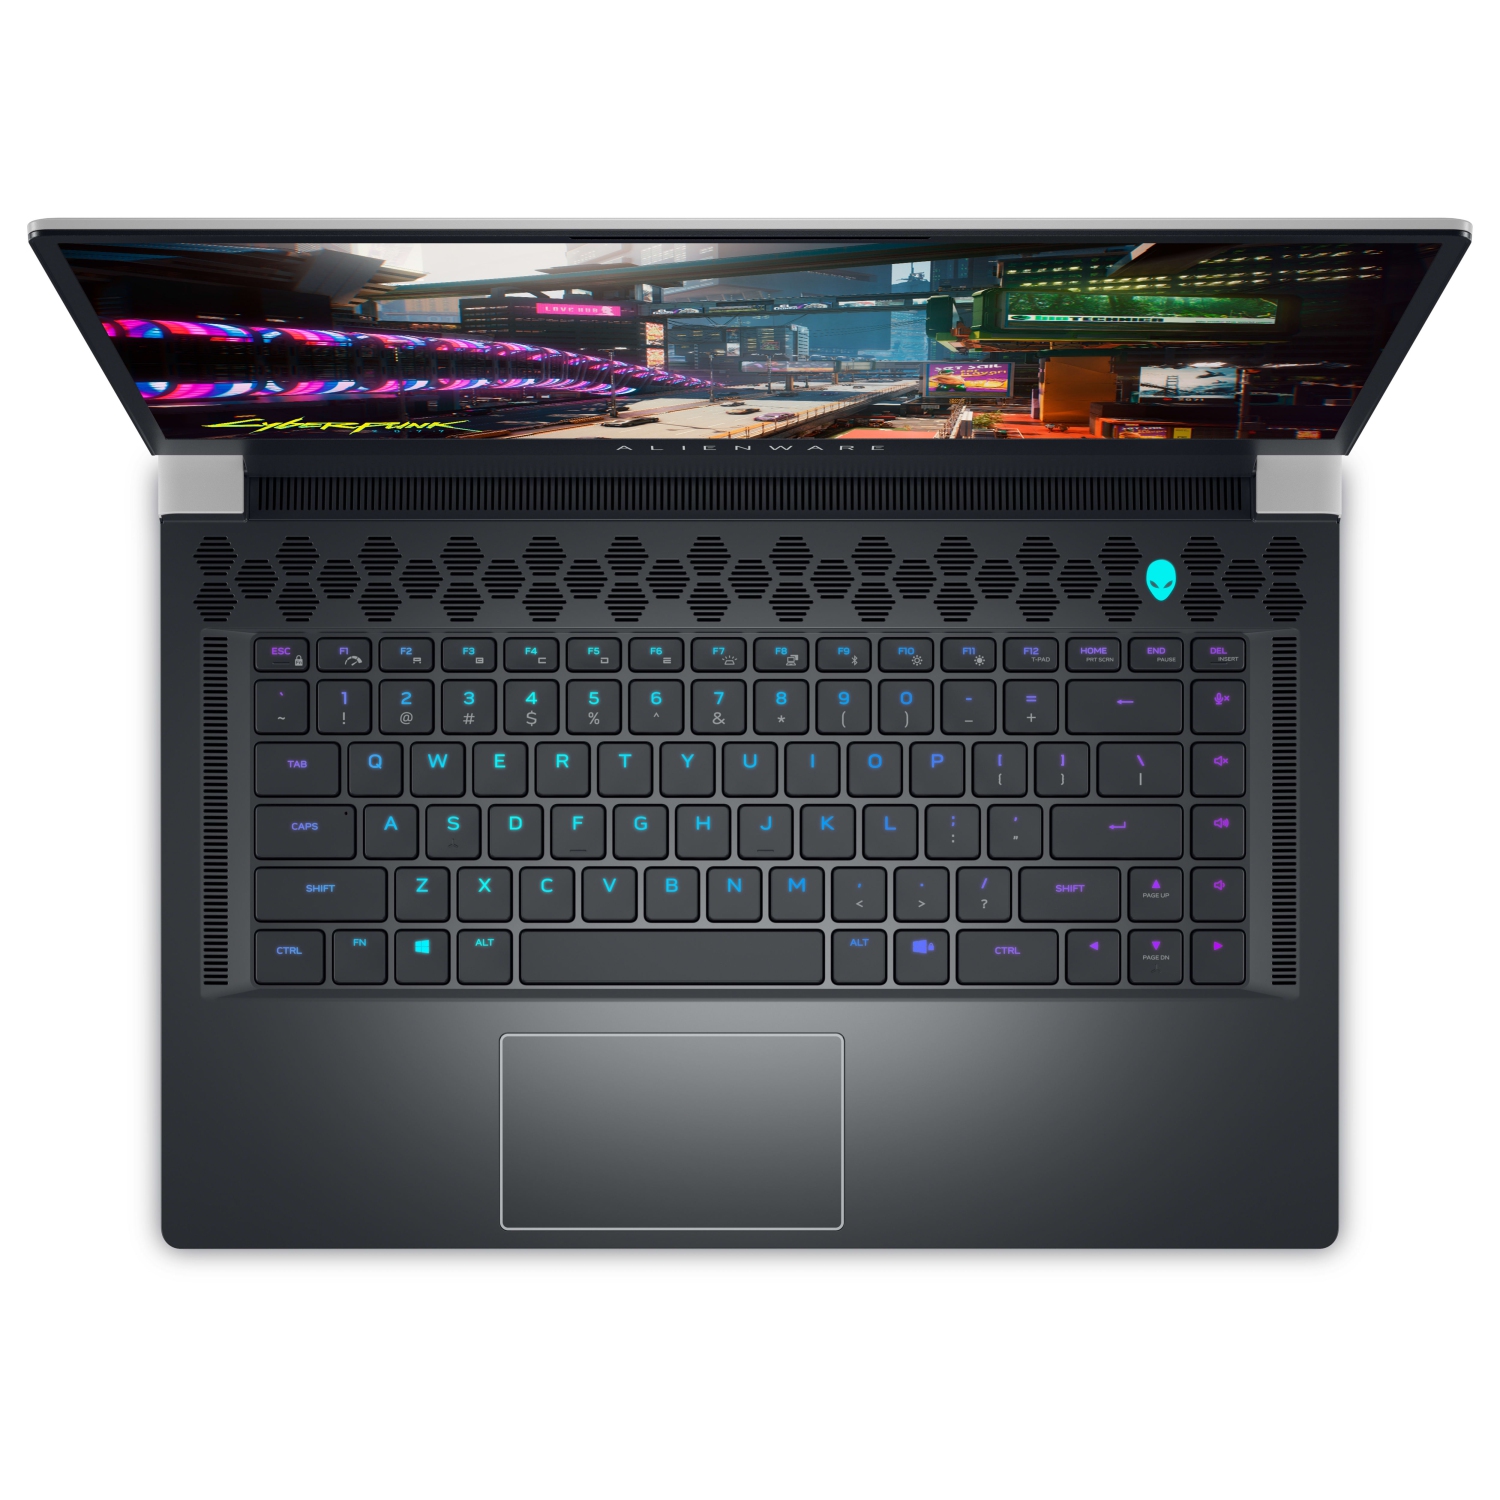 Refurbished (Excellent) – Dell Alienware X15 R2 Gaming Laptop (2022) | 15.6" FHD | Core i7 - 1TB SSD - 16GB RAM - RTX 3060 | 14 Cores @ 4.7 GHz - 12th Gen CPU - 6GB GDDR6